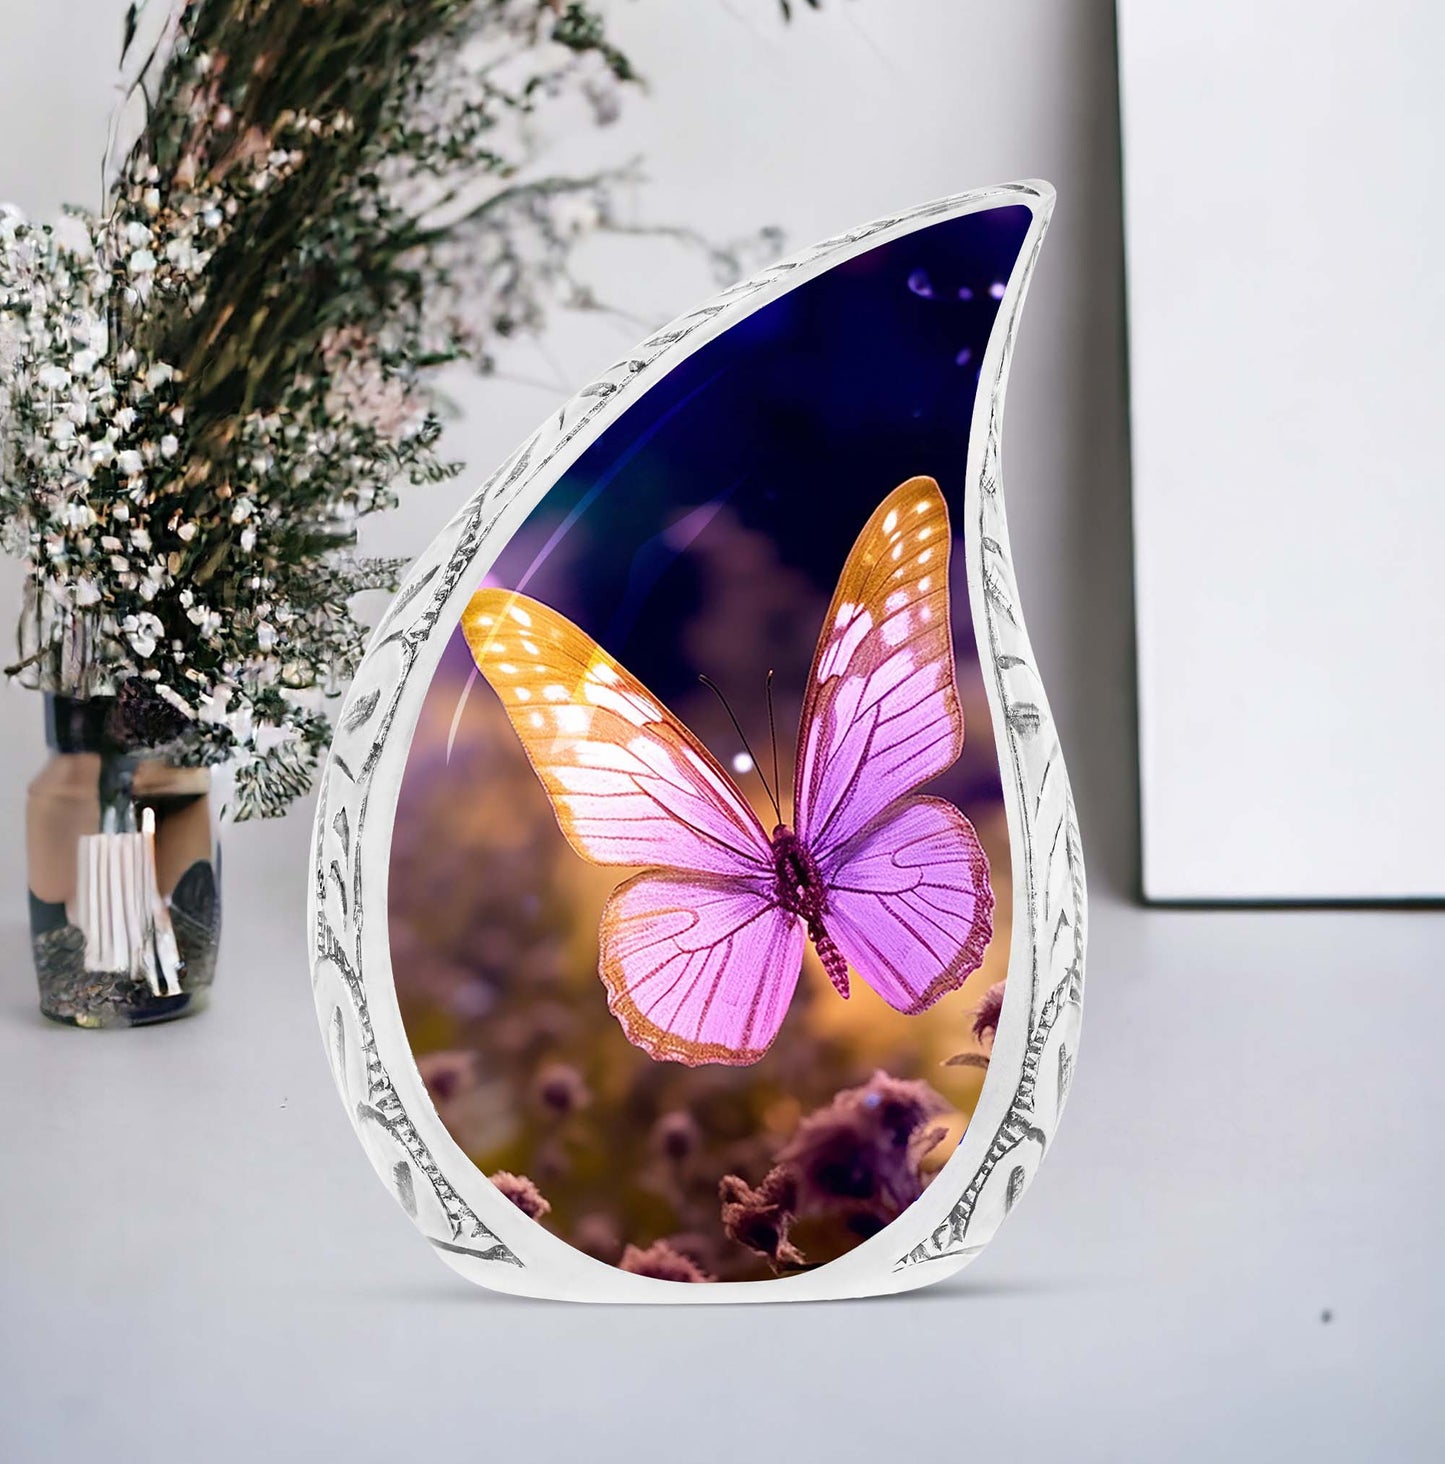 Large, decorative cremation urn for adult ashes with a beautiful butterfly design